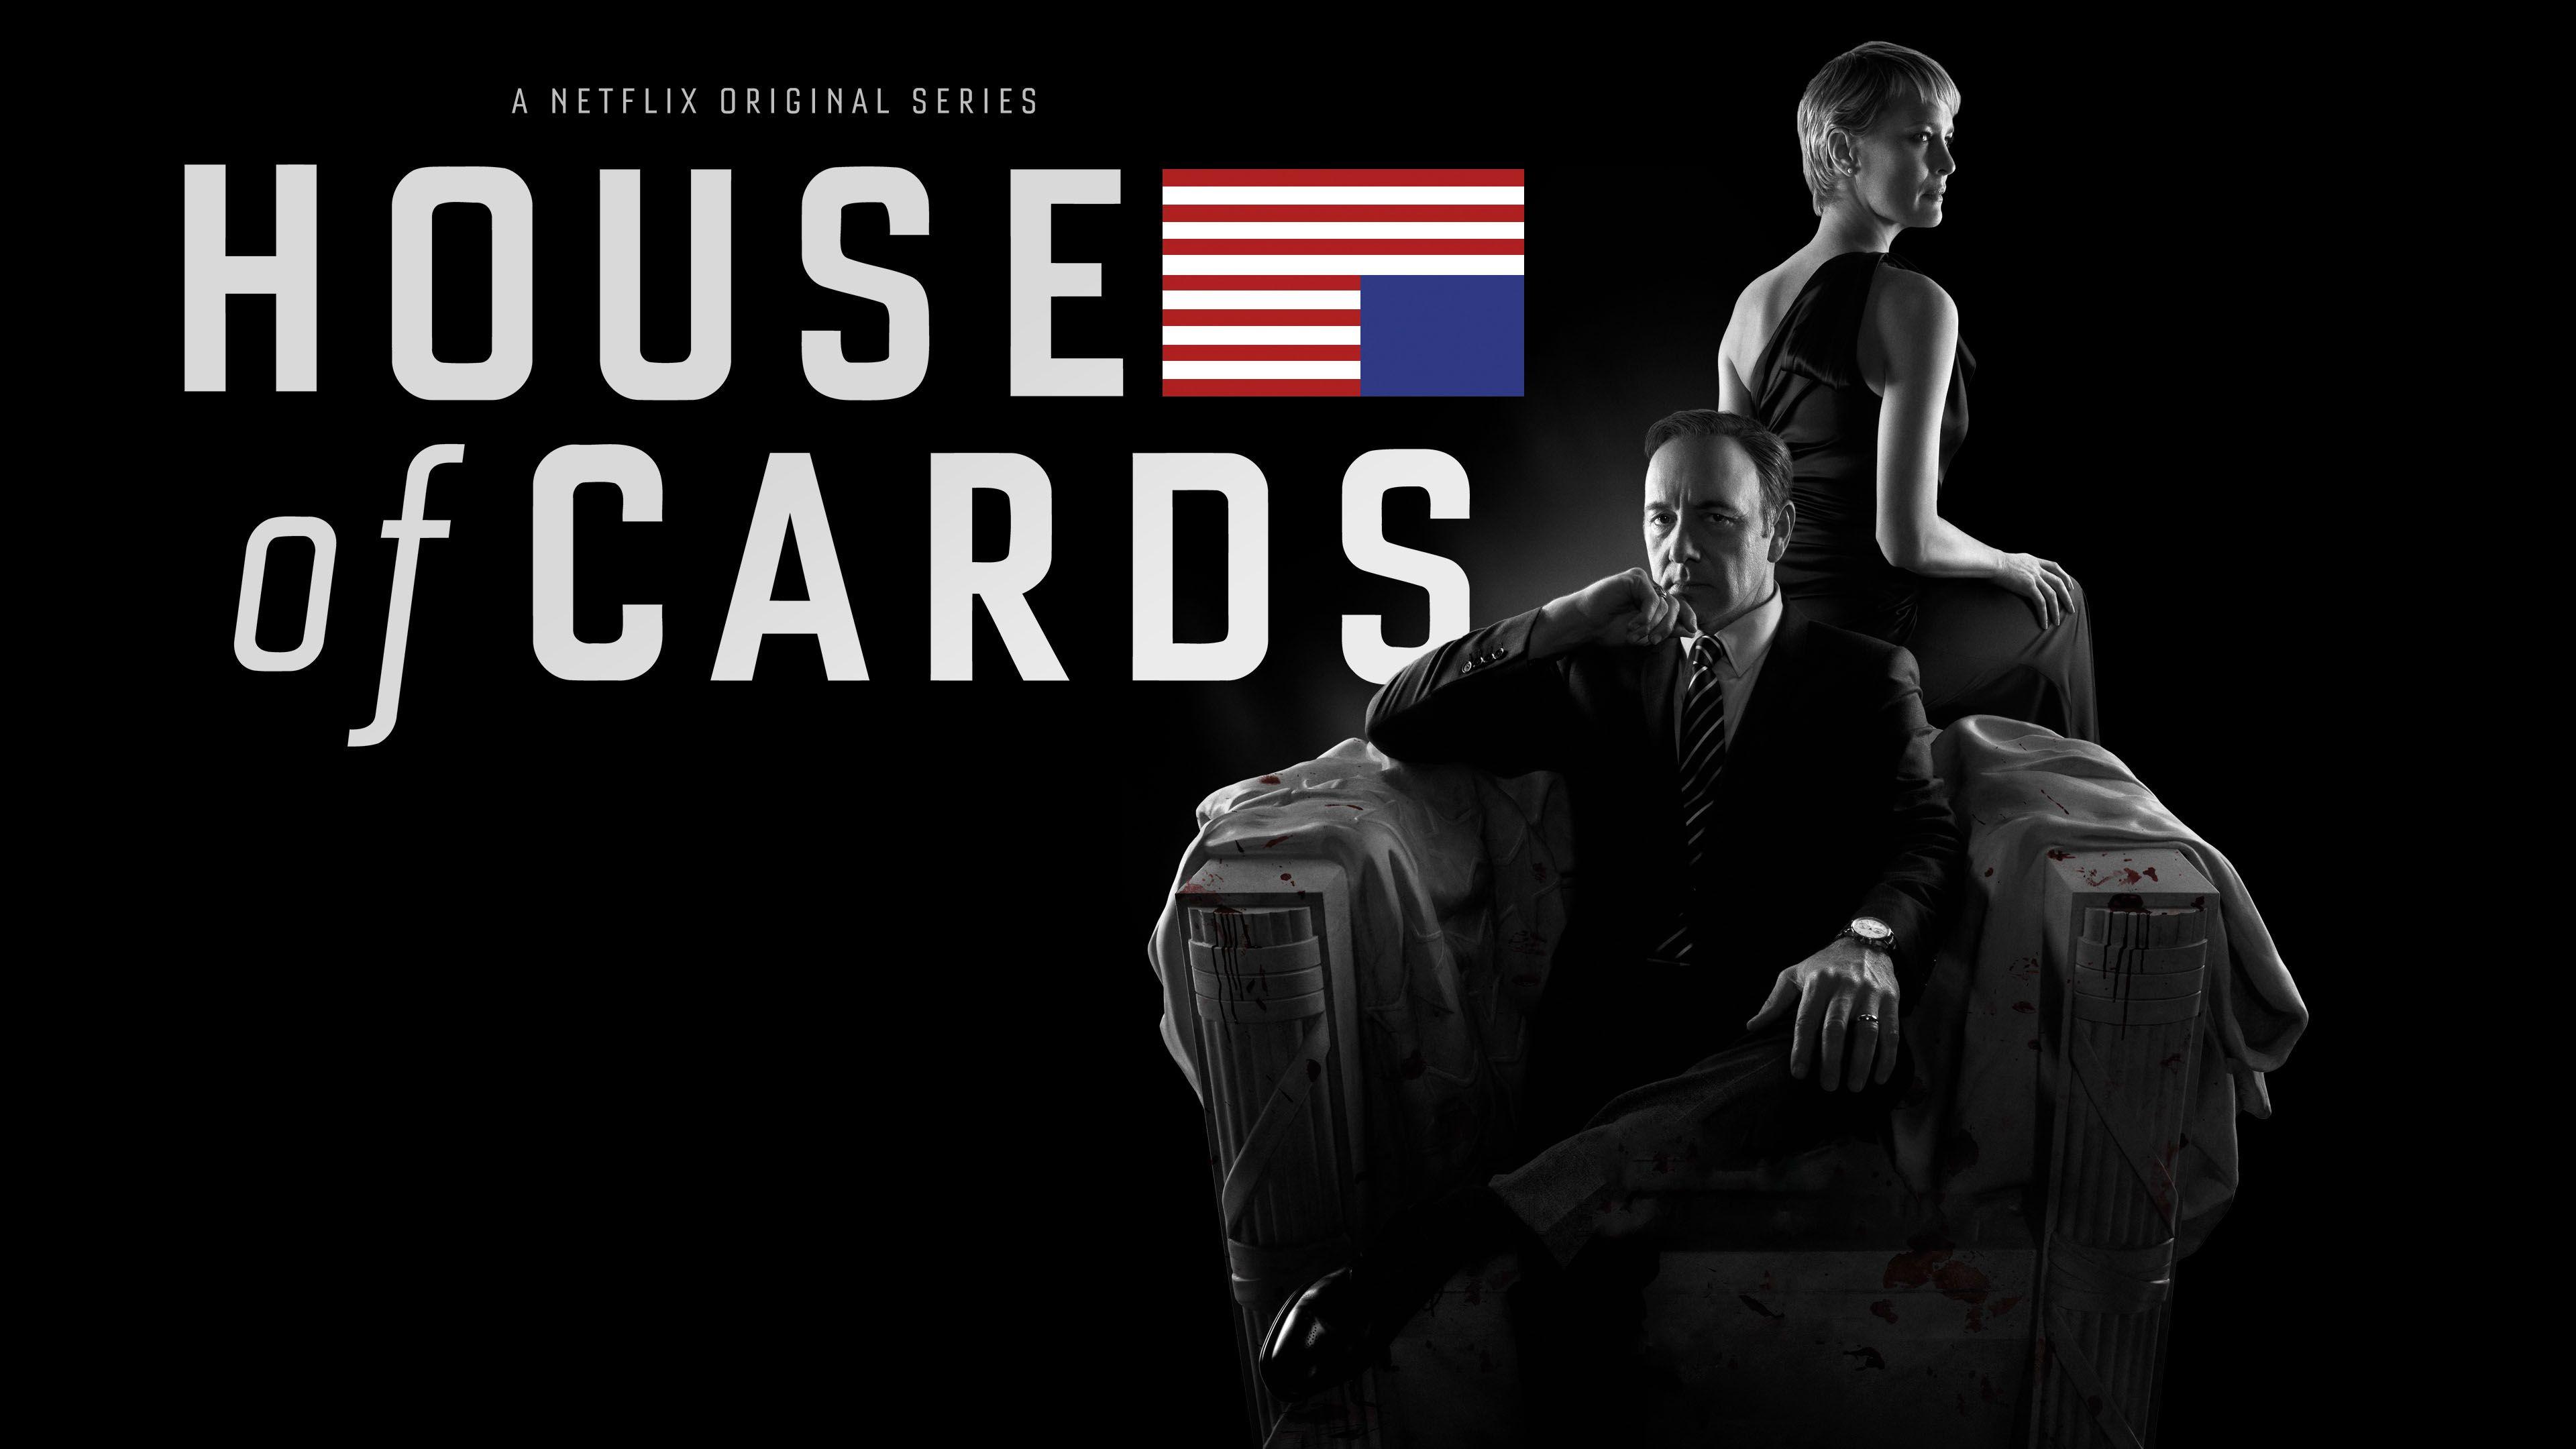 House Of Cards Netflix Promo Poster 16 9 Ultra